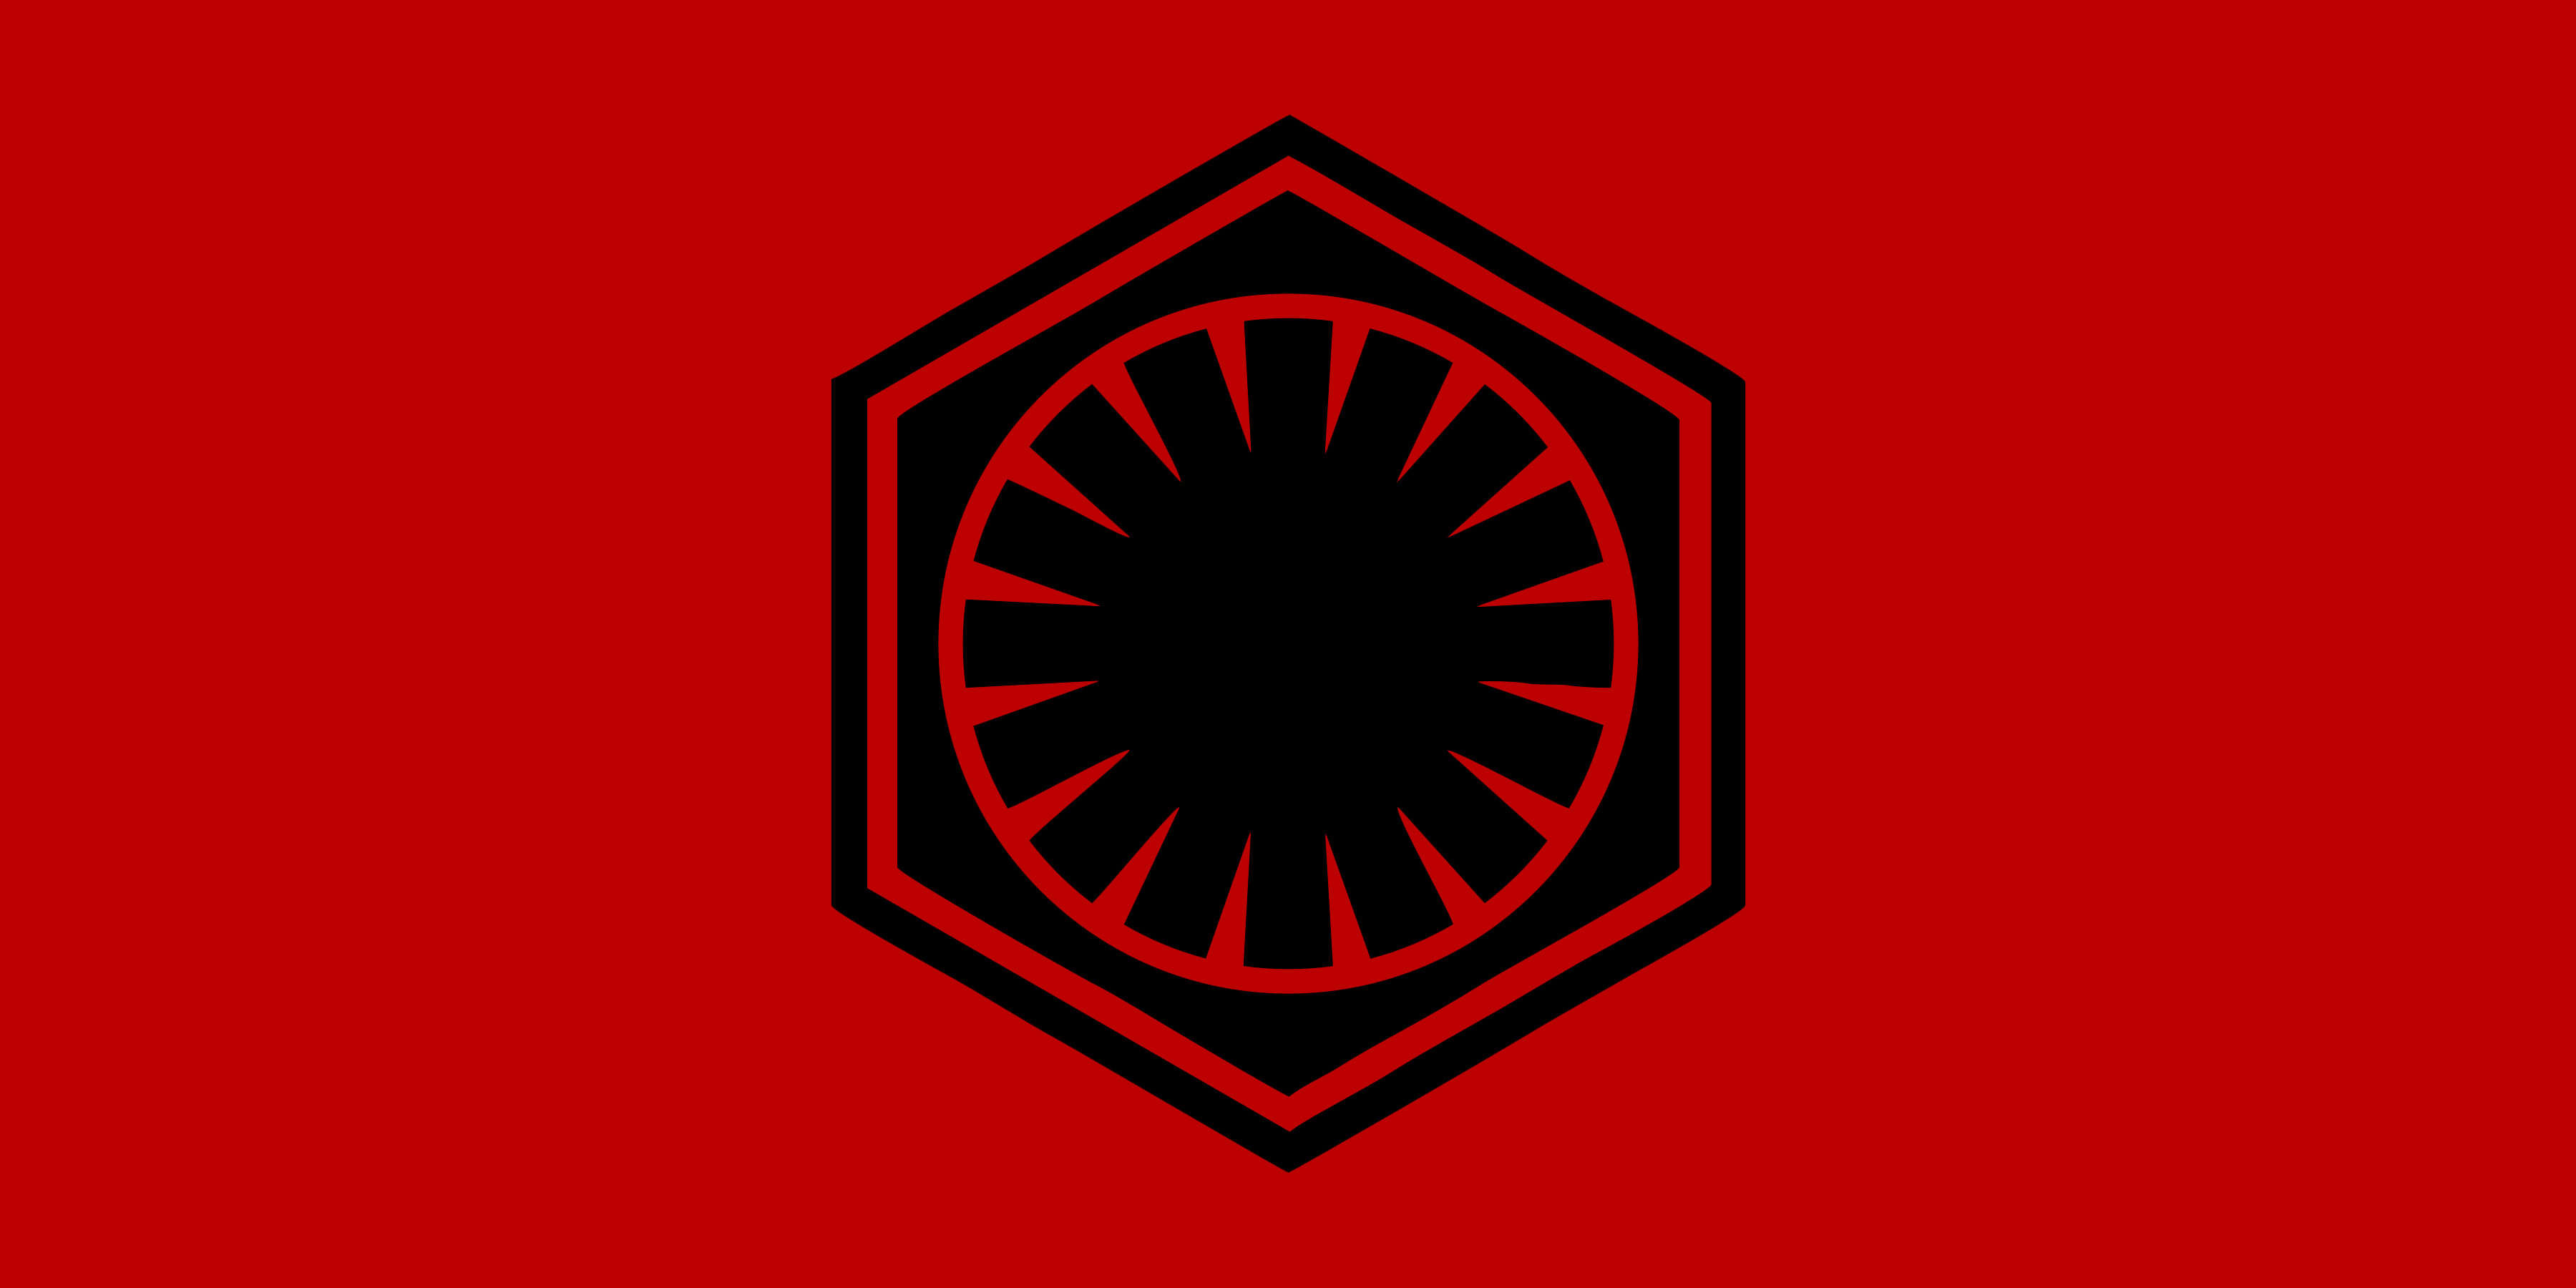 Flag of the First Order (Alternate) by RedRich1917 on .